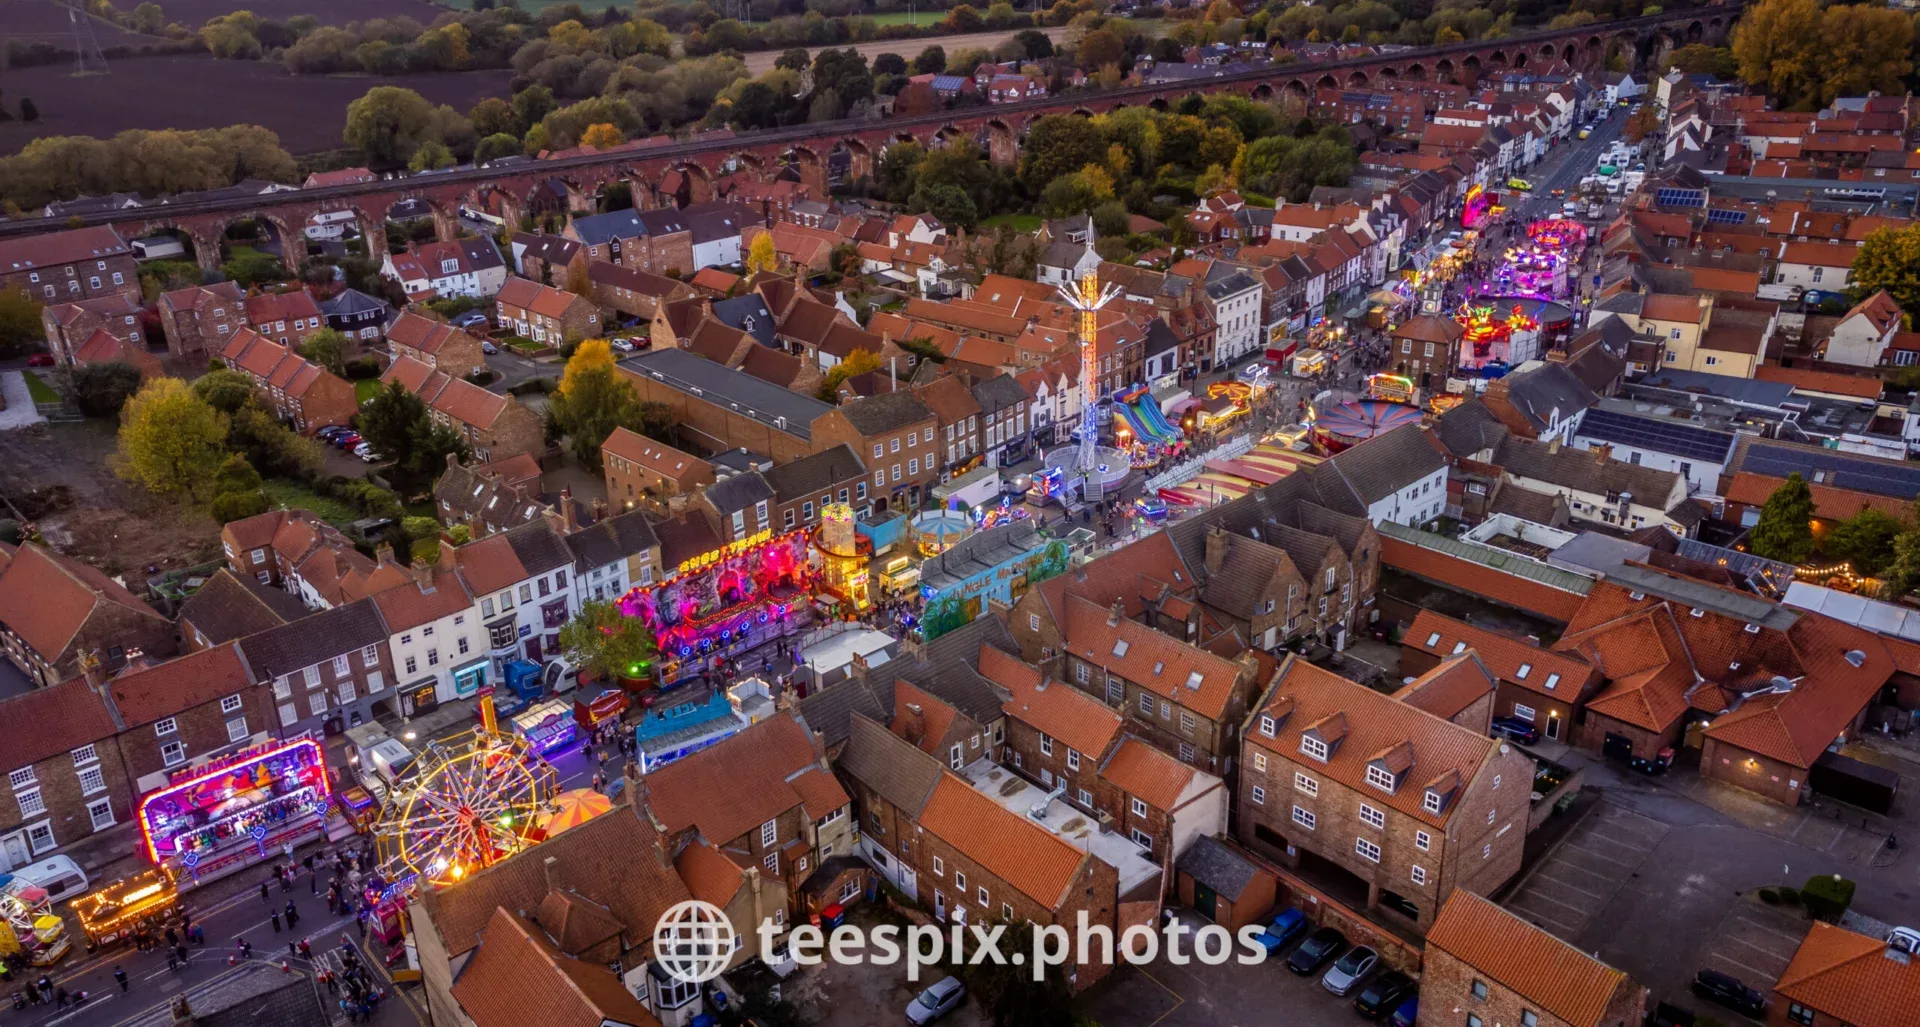 Yarm Fair from above looking down on the High Street